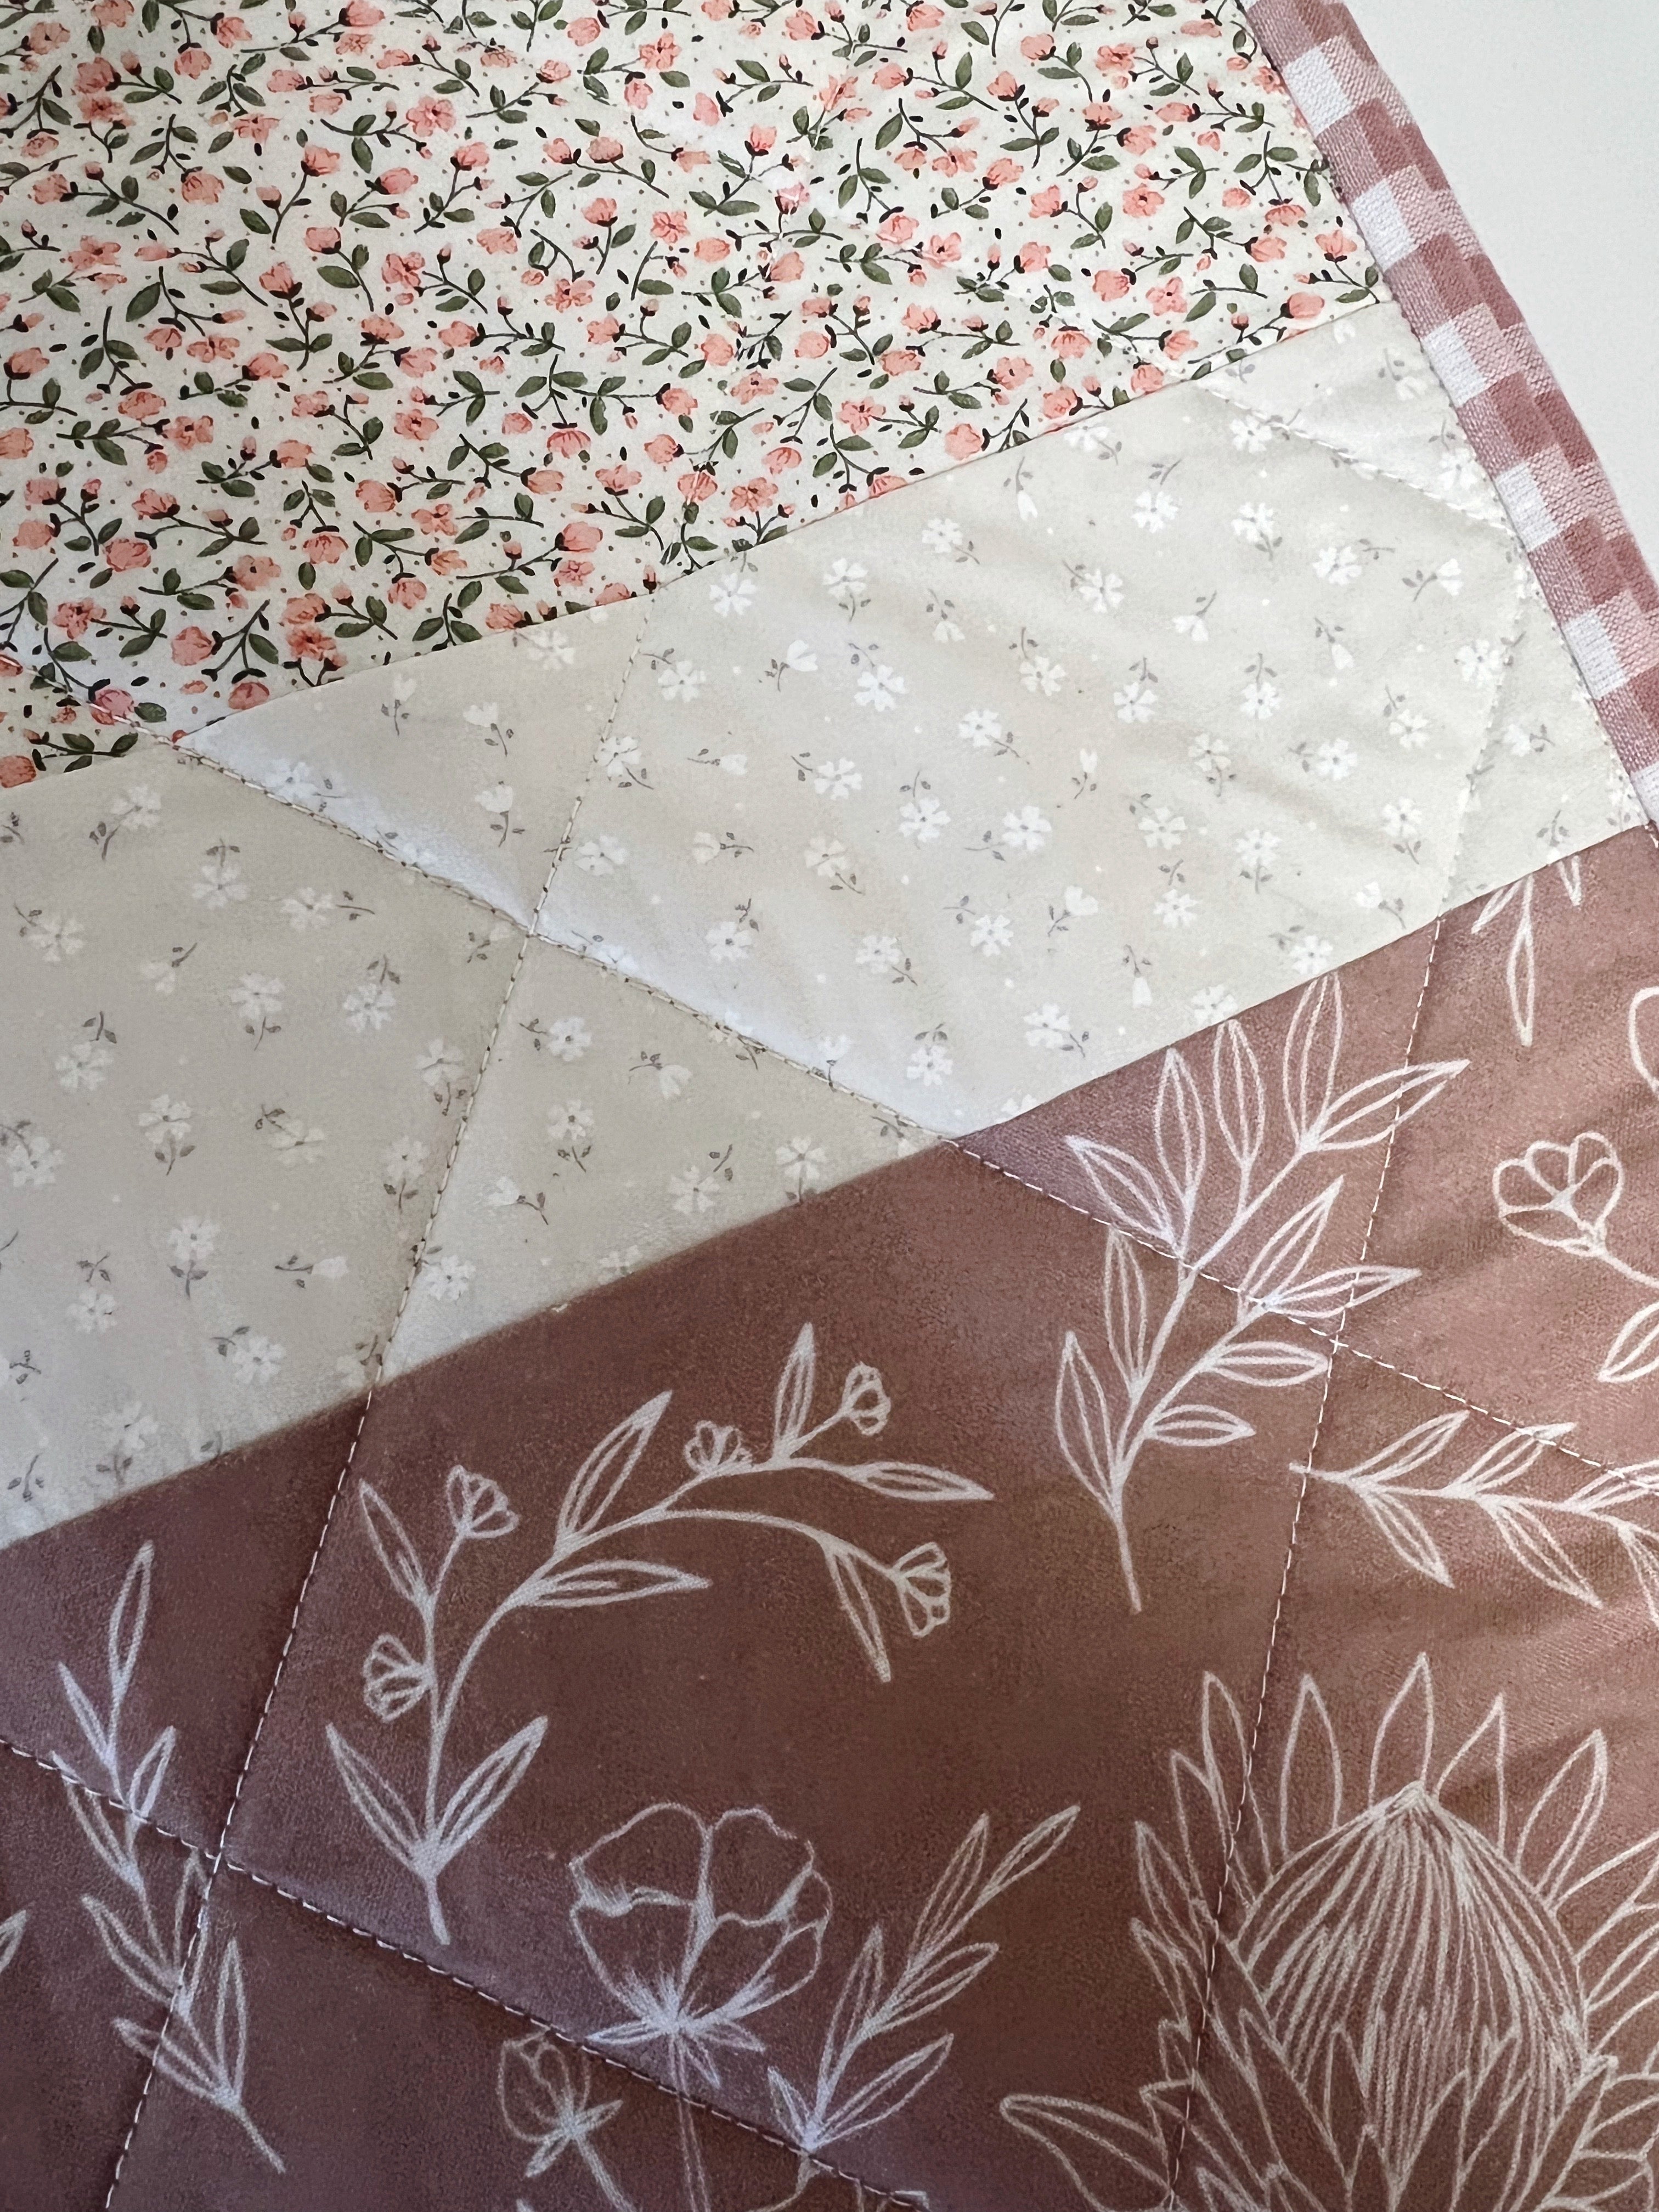 cottagecore bunnies patchwork baby quilt dusty rose gingham - ready to ship